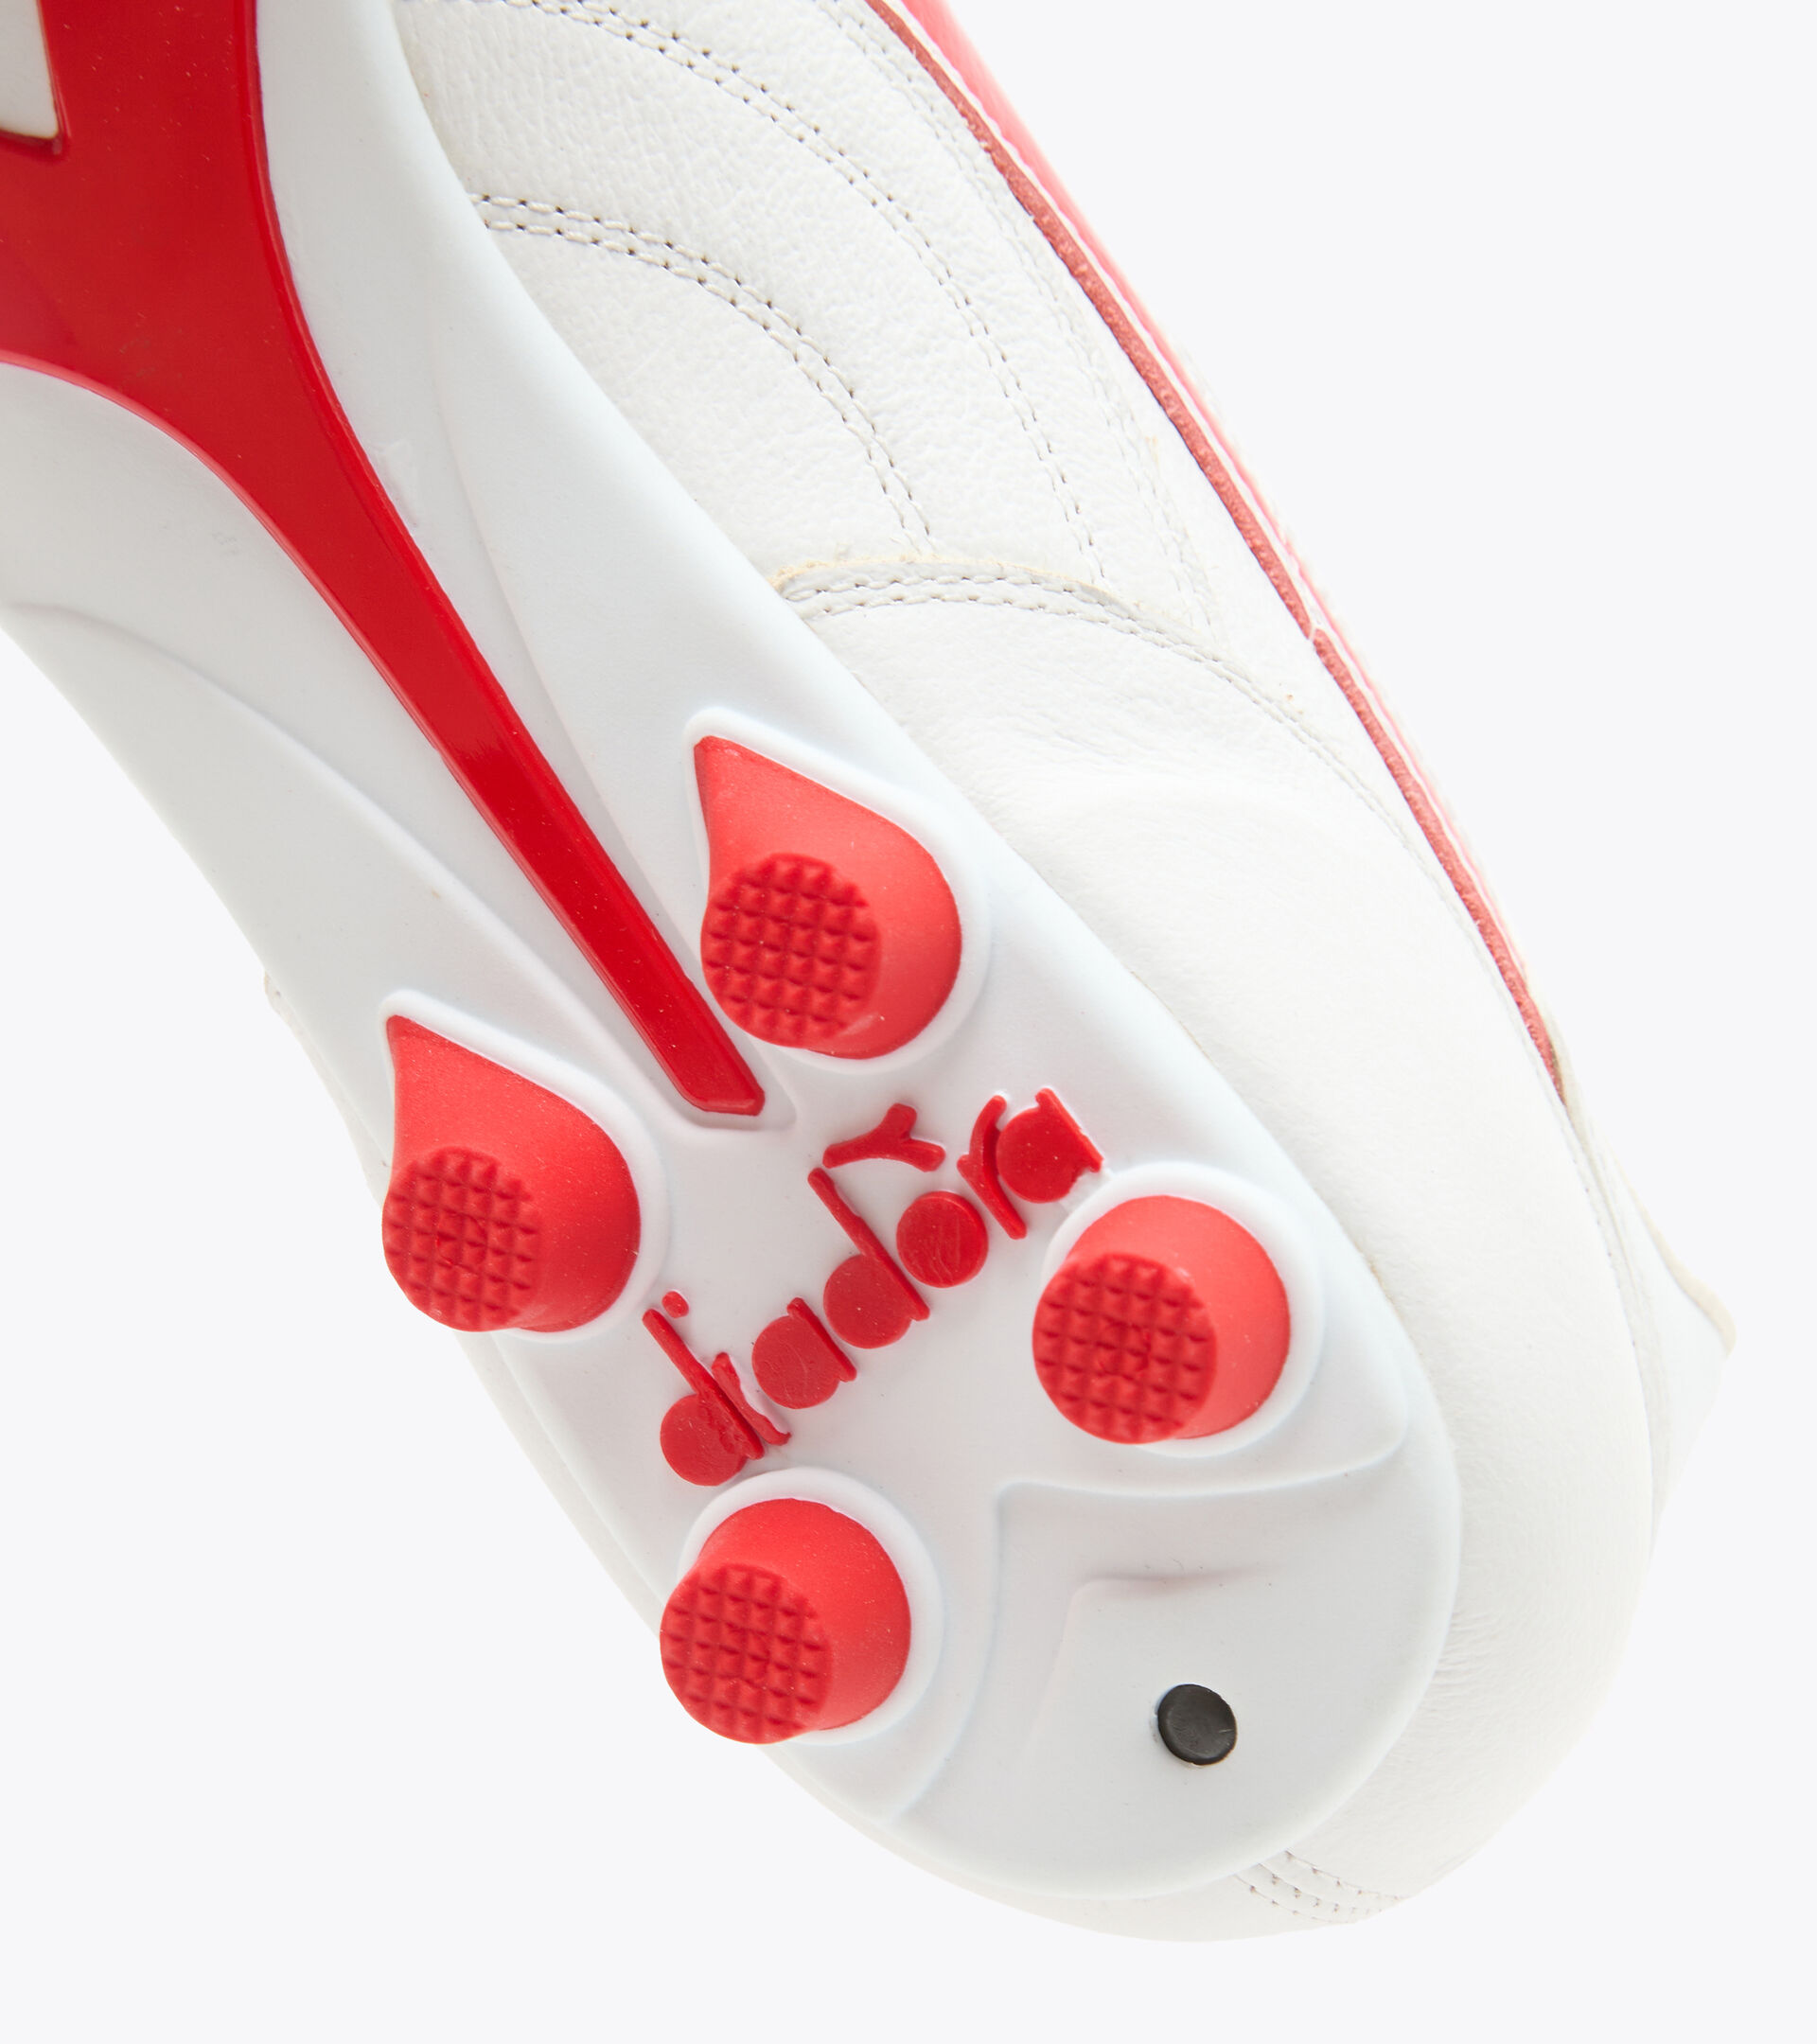 Firm ground football boots - Made in Italy BRASIL ITALY OG LT+  MDPU WHITE/MILANO RED - Diadora